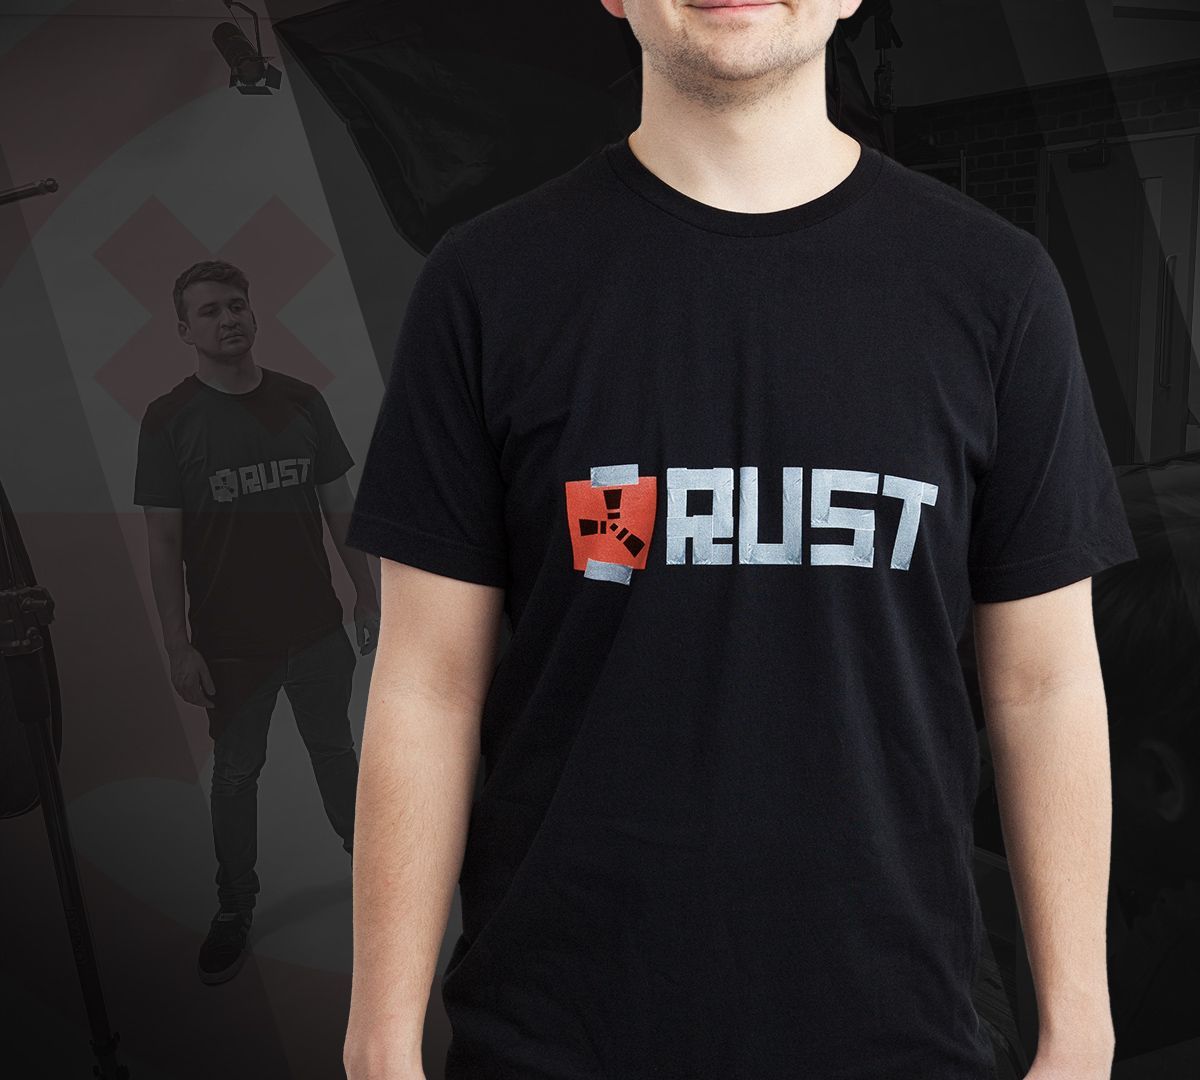 on Twitter: "The Rust Sticky Tape Hoodies and T-Shirts have been refreshed on the Facepunch Store with a new design you even more realistic looking duct tape! https://t.co/1BV6CZCLKA https://t.co/FUpTBGbbzZ https://t.co/jU069DT51y" /